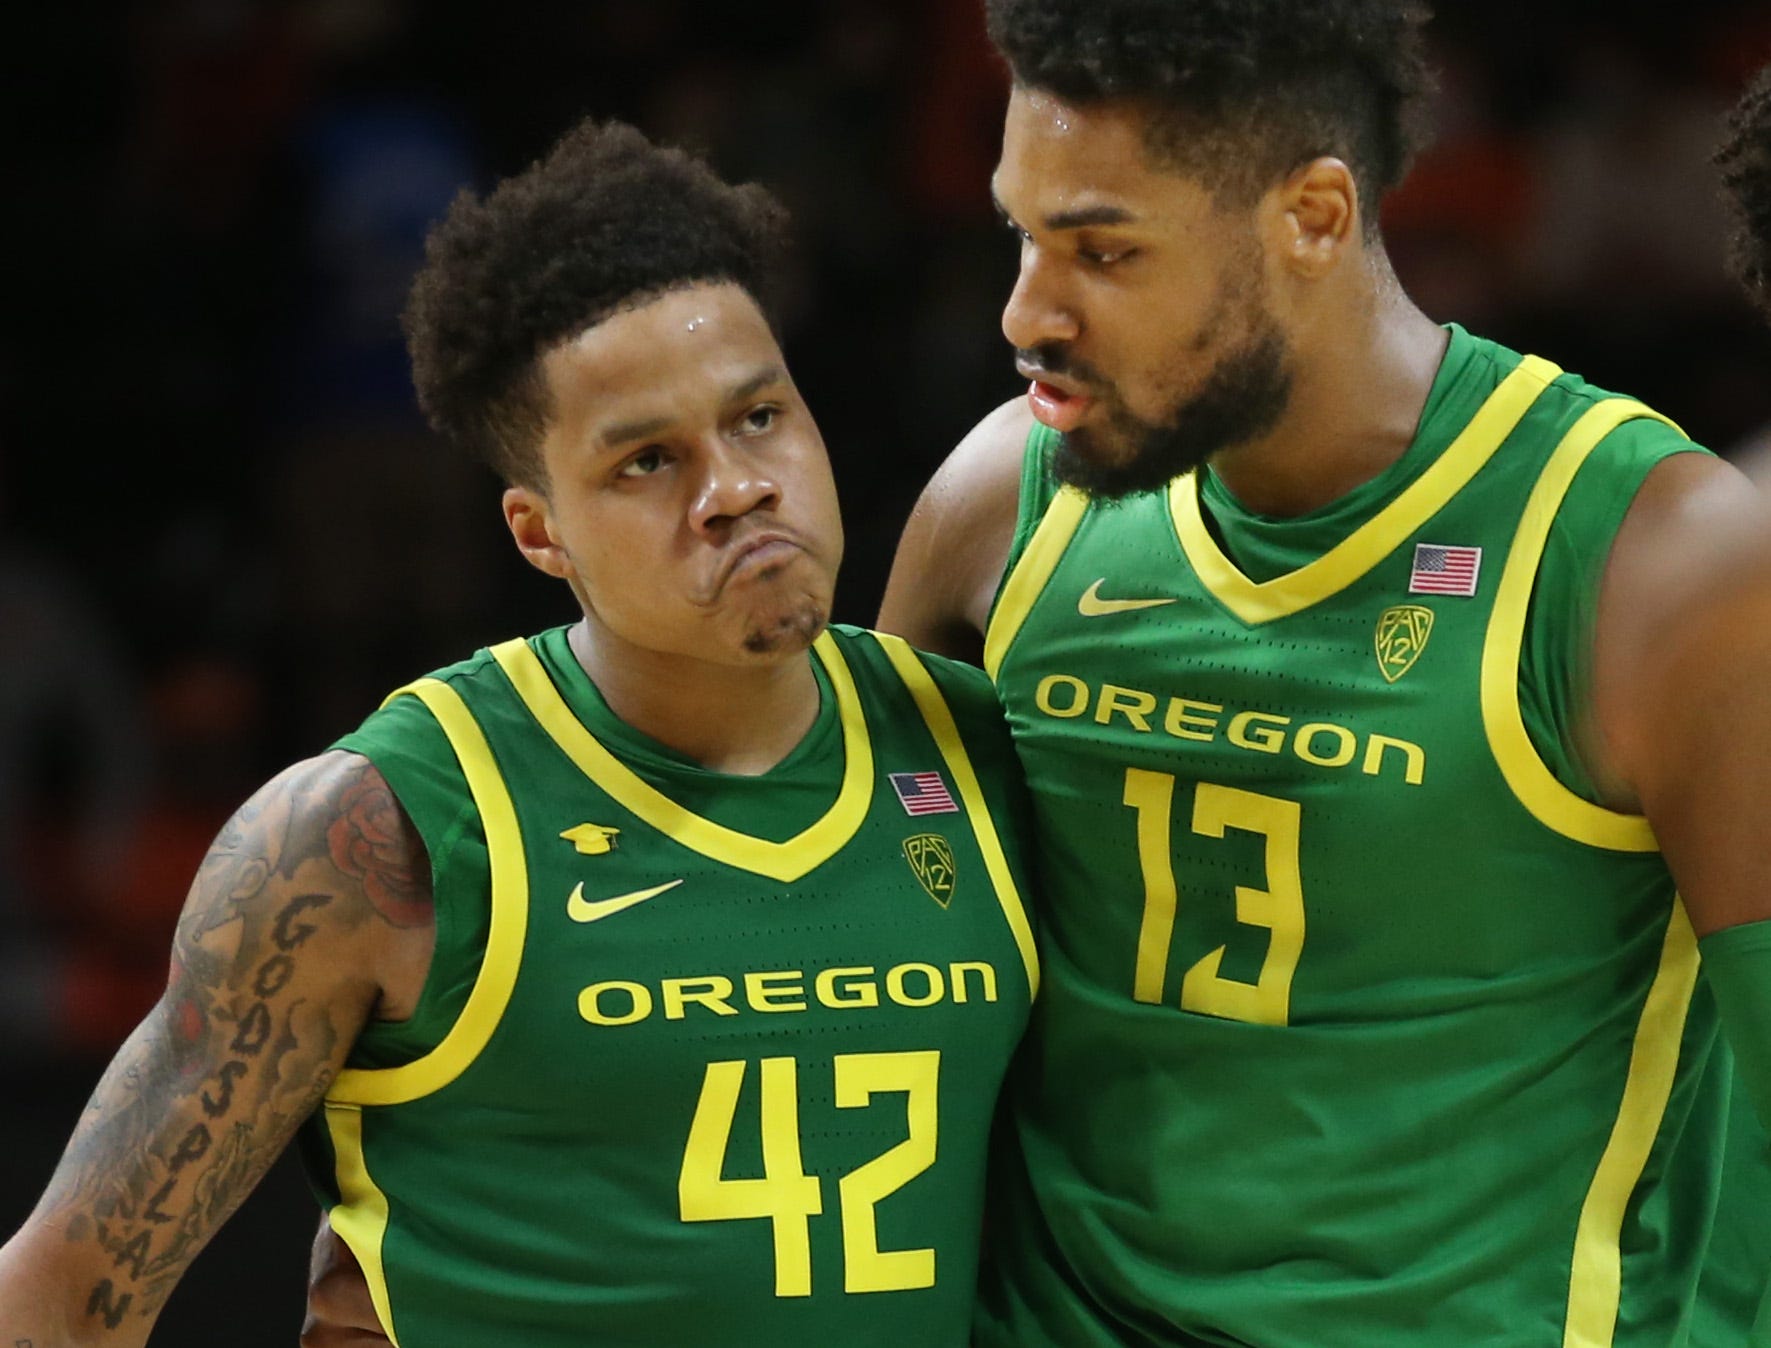 University of Oregon men's basketball starting to show up in NCAA bracket predictions